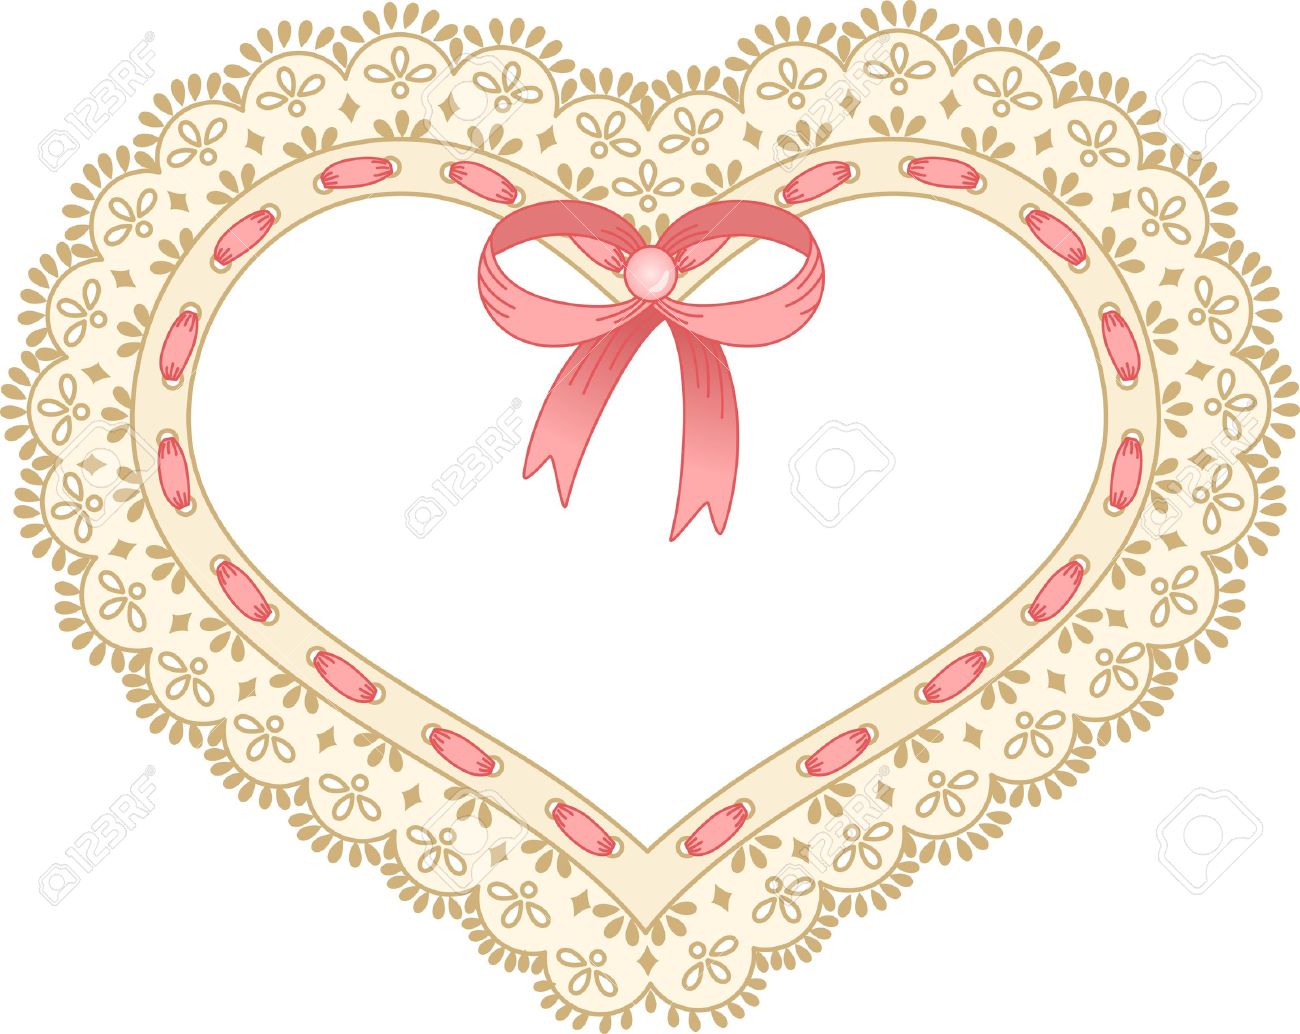 Lace heart clipart